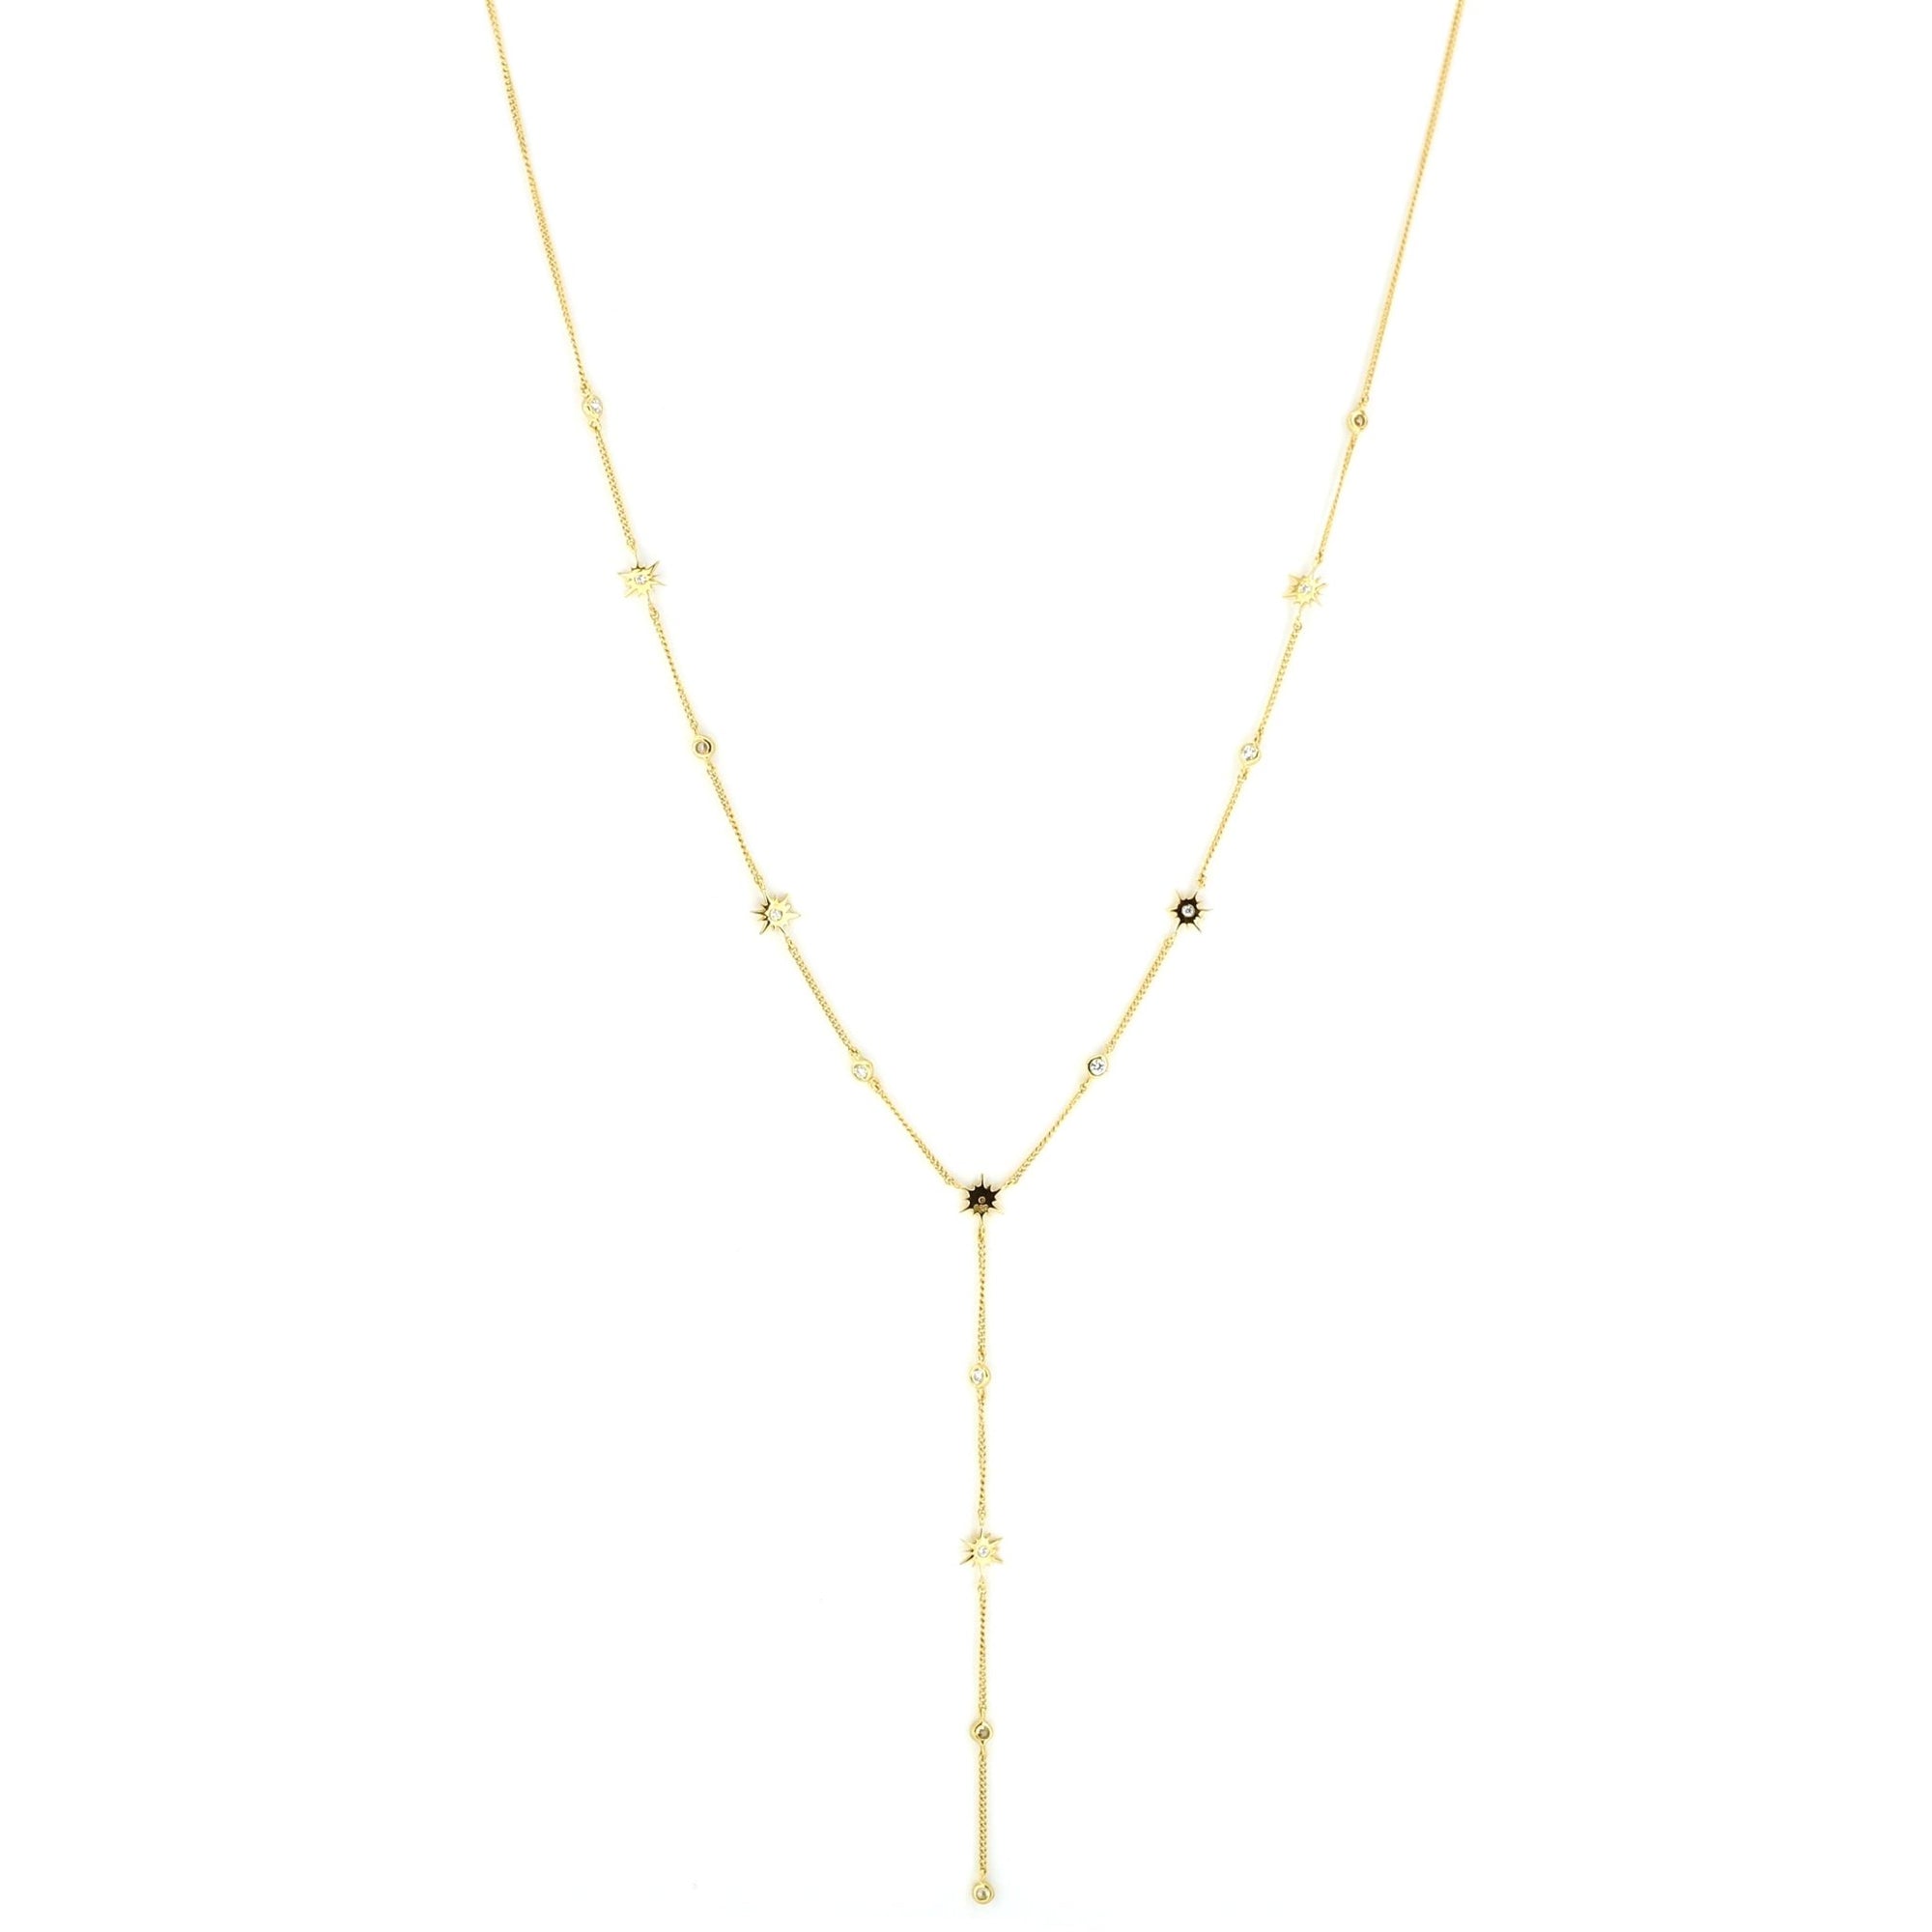 TINY BELIEVE Y NECKLACE - CUBIC ZIRCONIA & GOLD - SO PRETTY CARA COTTER